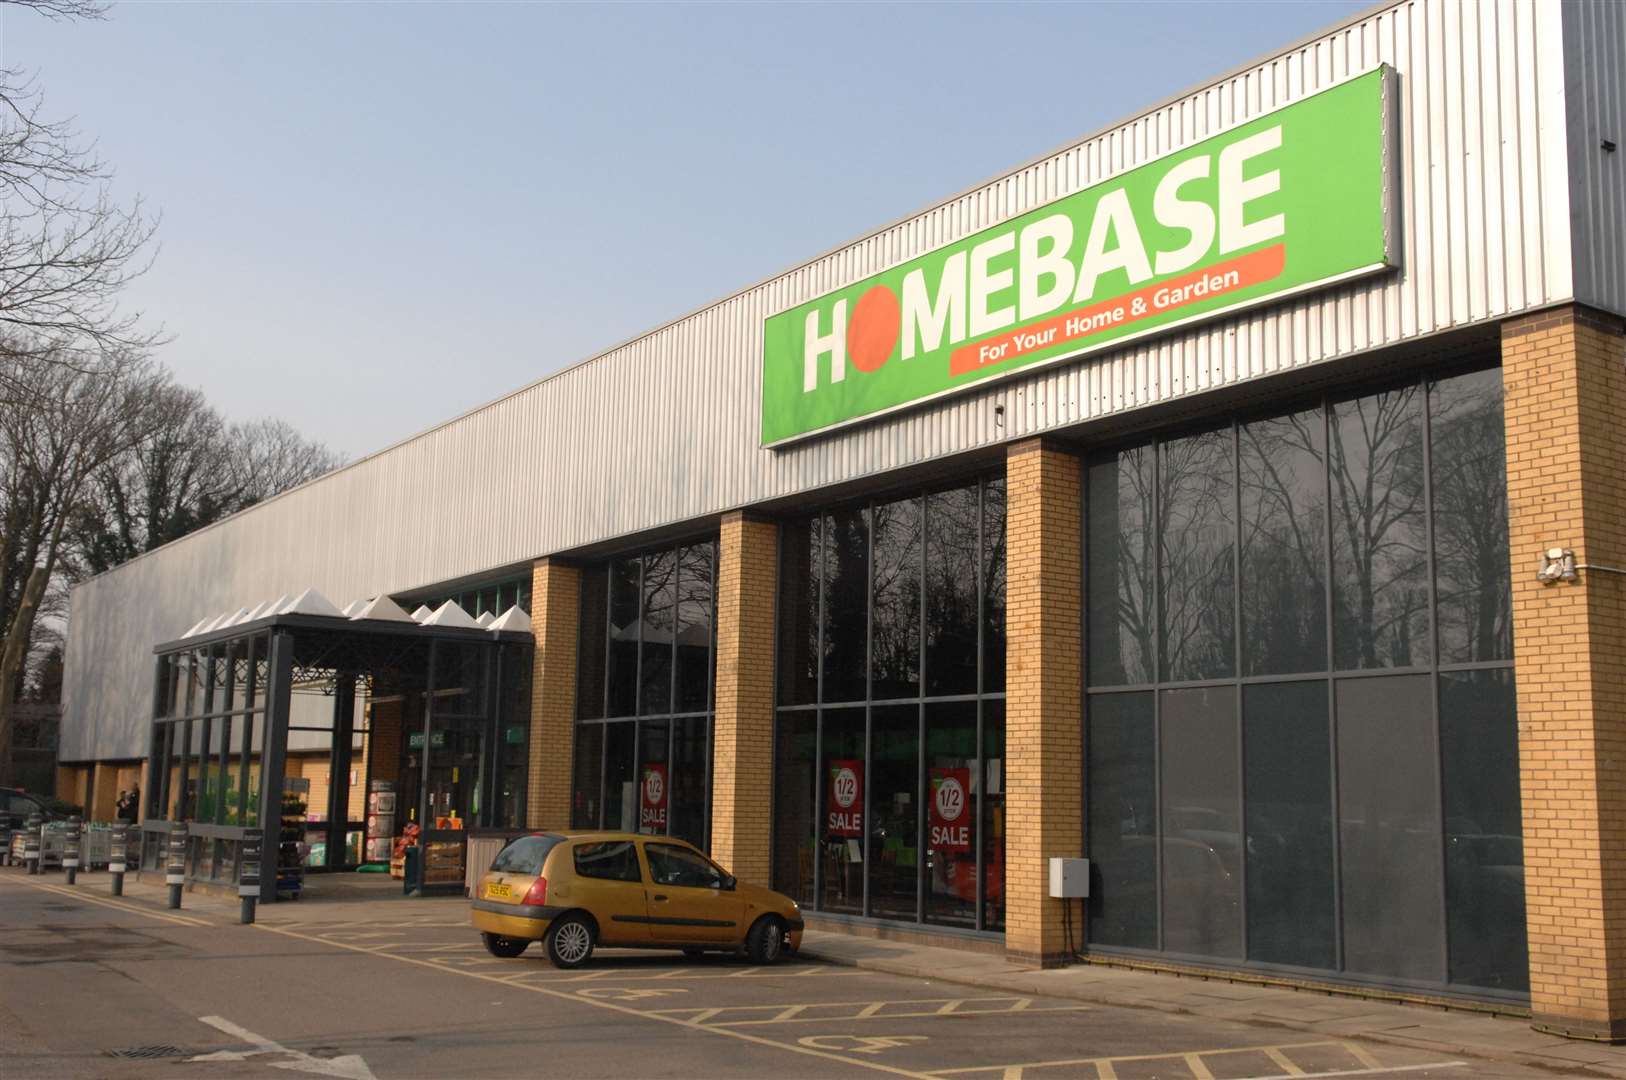 Homebase moved out of the premises more than two years ago